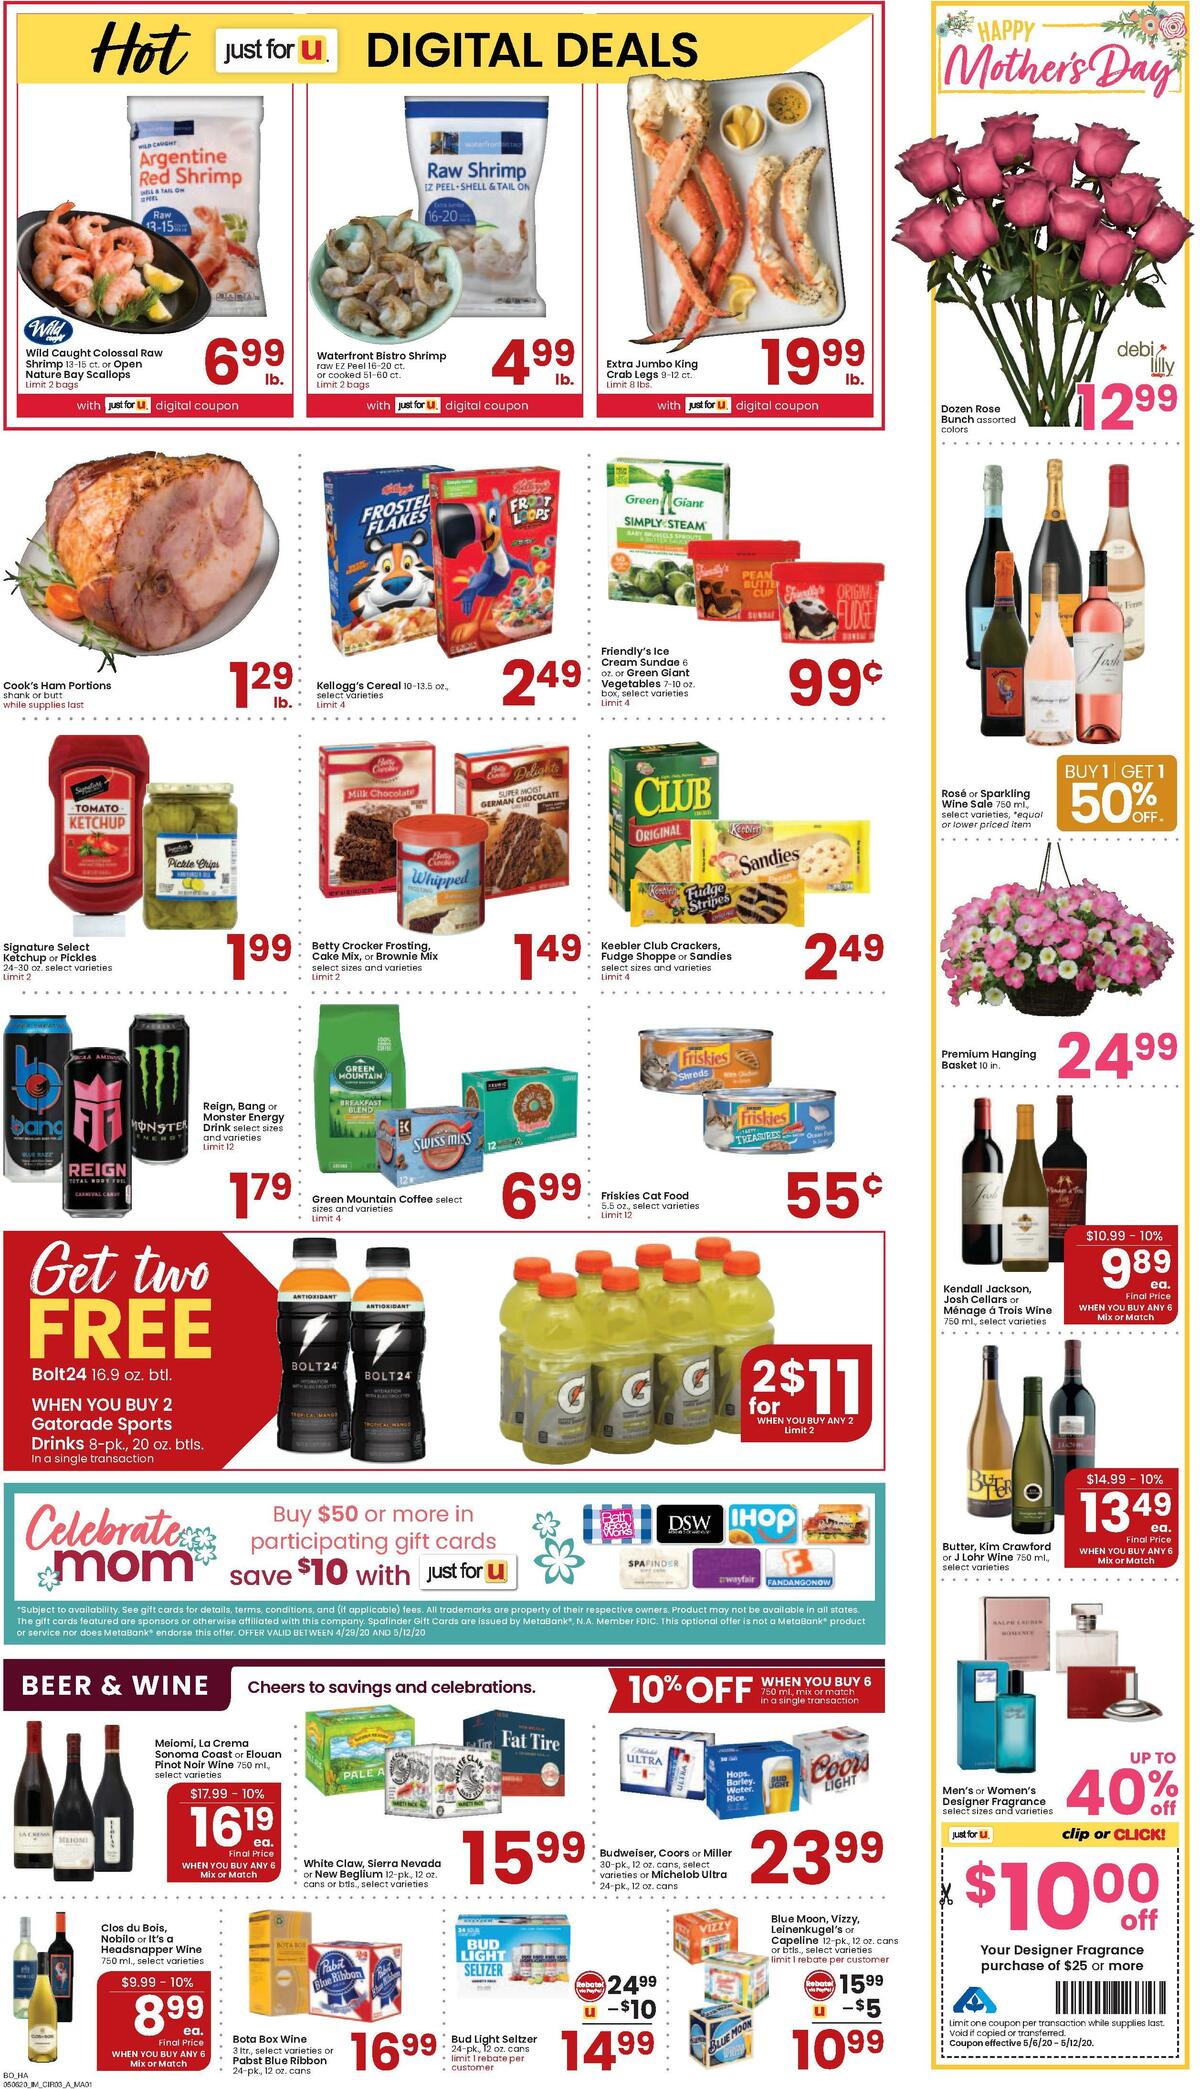 Albertsons Weekly Ad from May 6